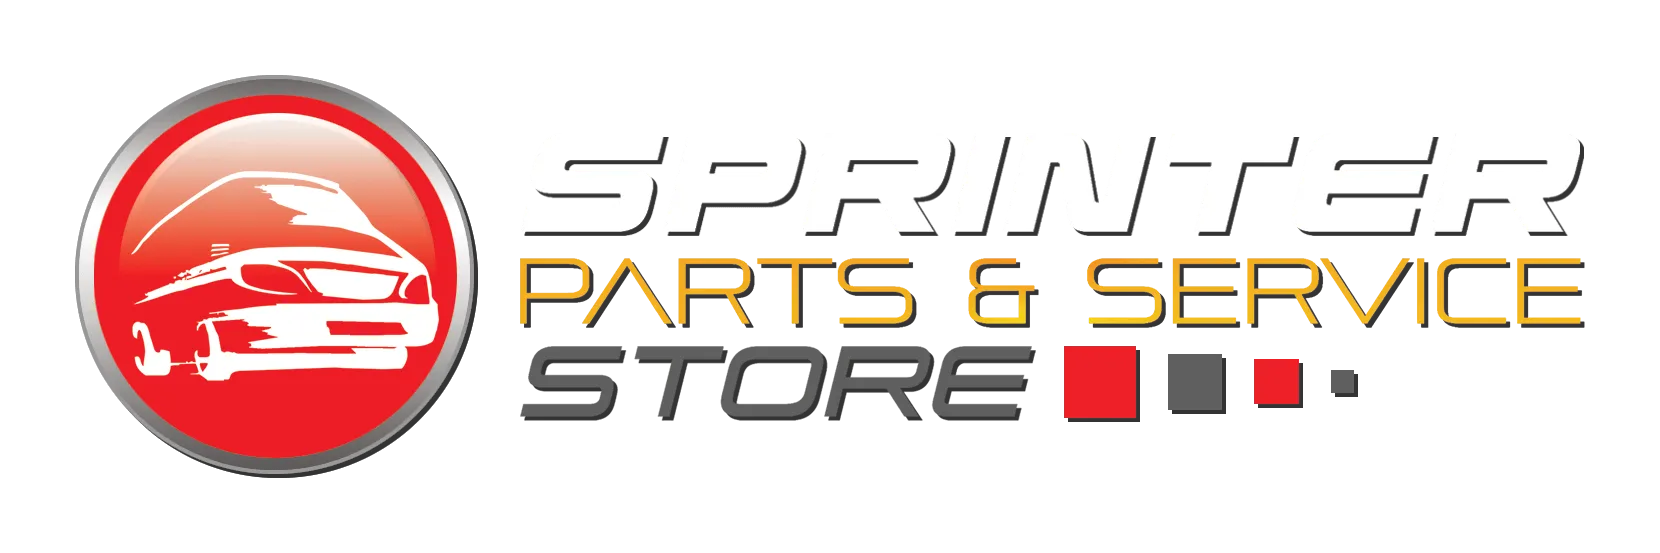 Sprinter Parts And Service Store